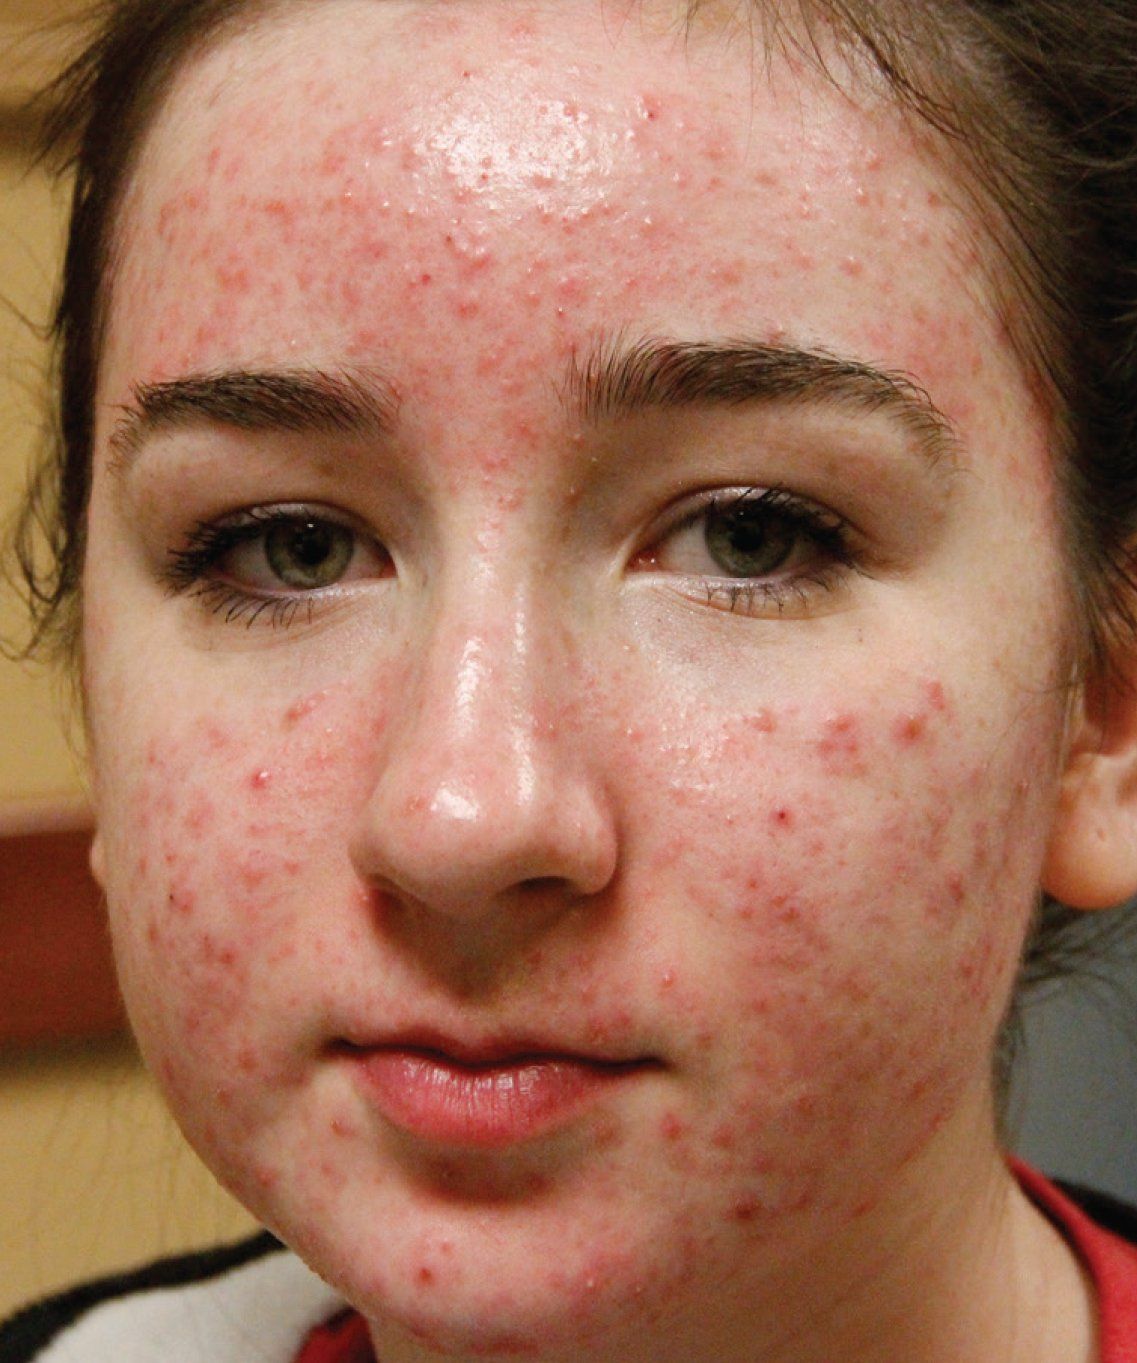 BBL Before Photo - A young woman's face with cystic acne.